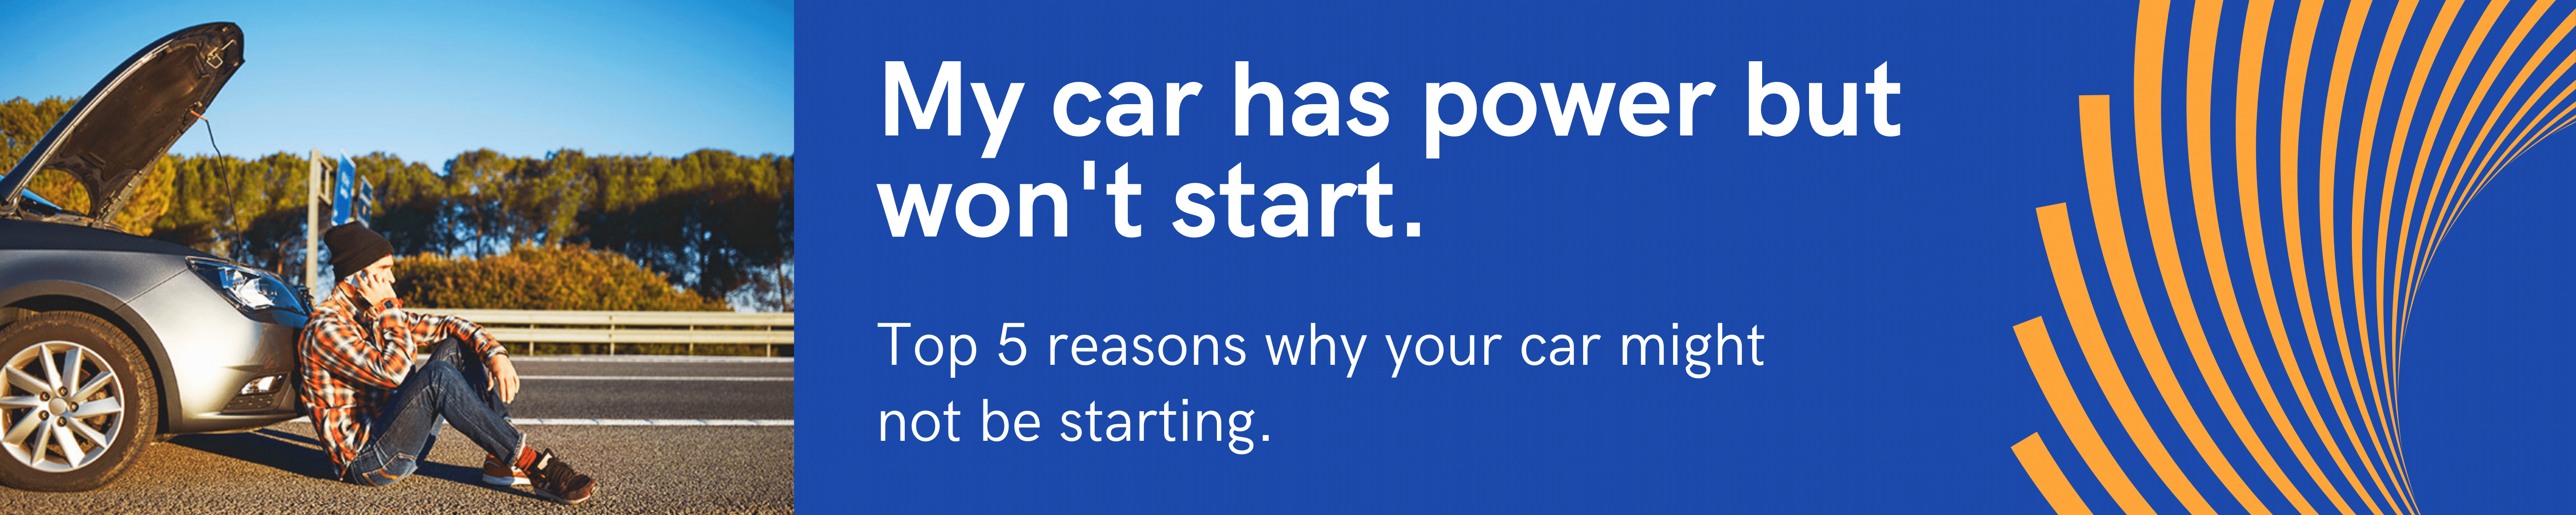 My Car Have Power But Won't Start?